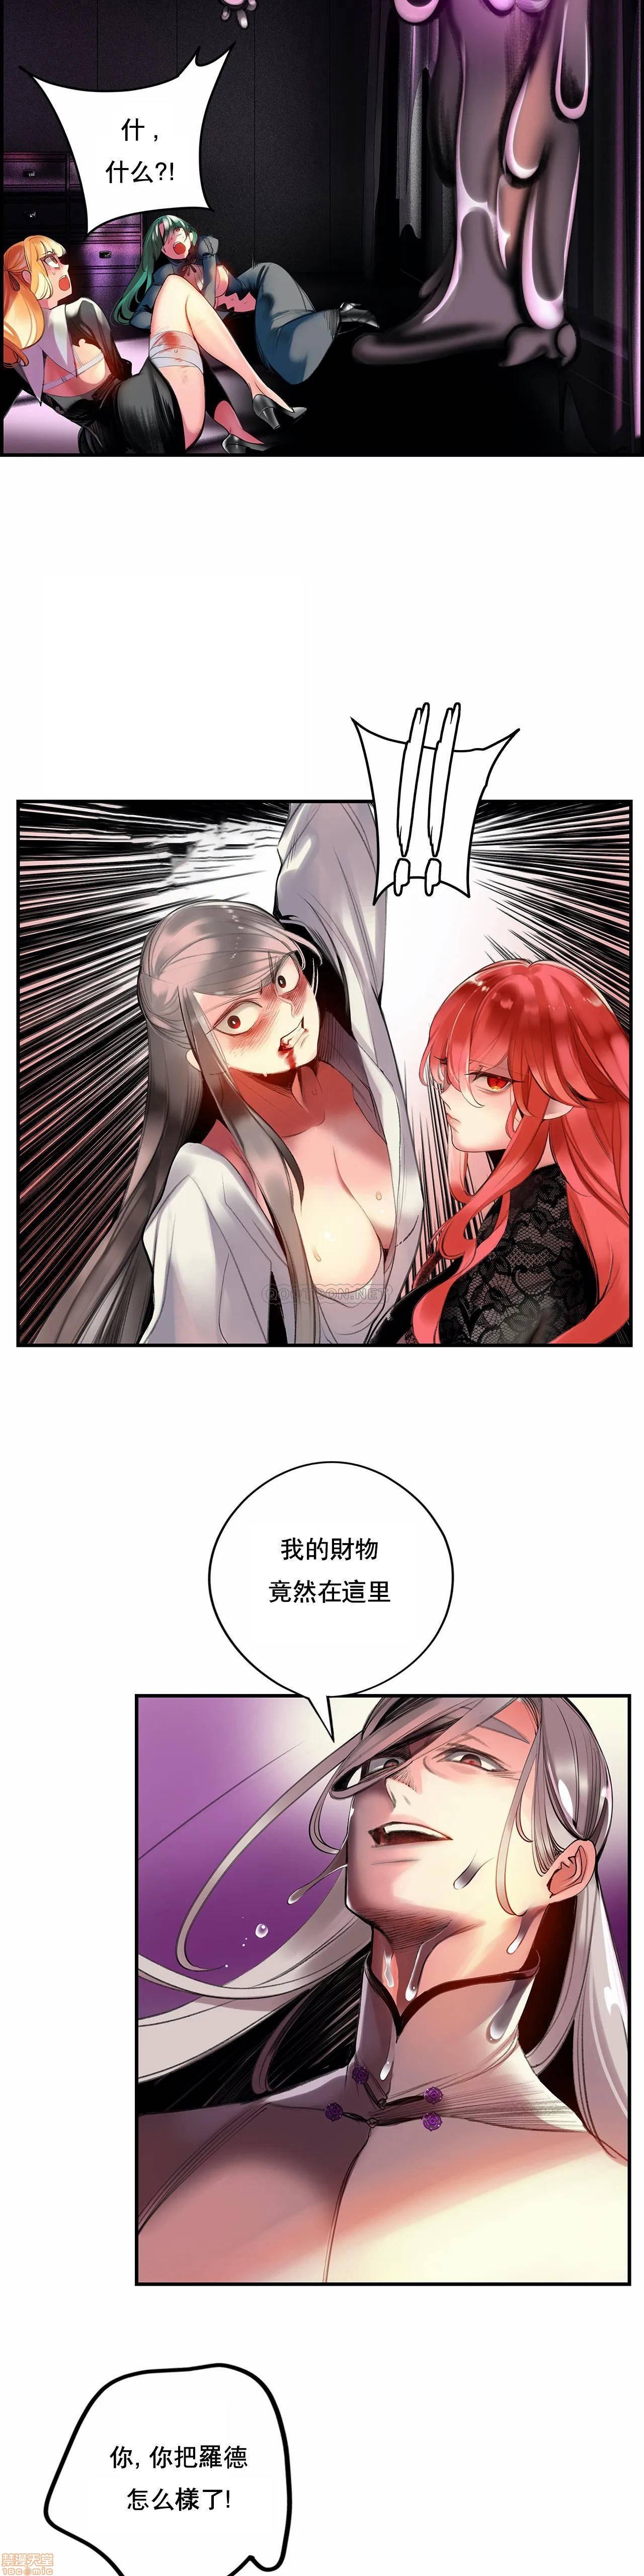 [Juder] Lilith`s Cord (第二季) Ch.77-93 end [Chinese] 112